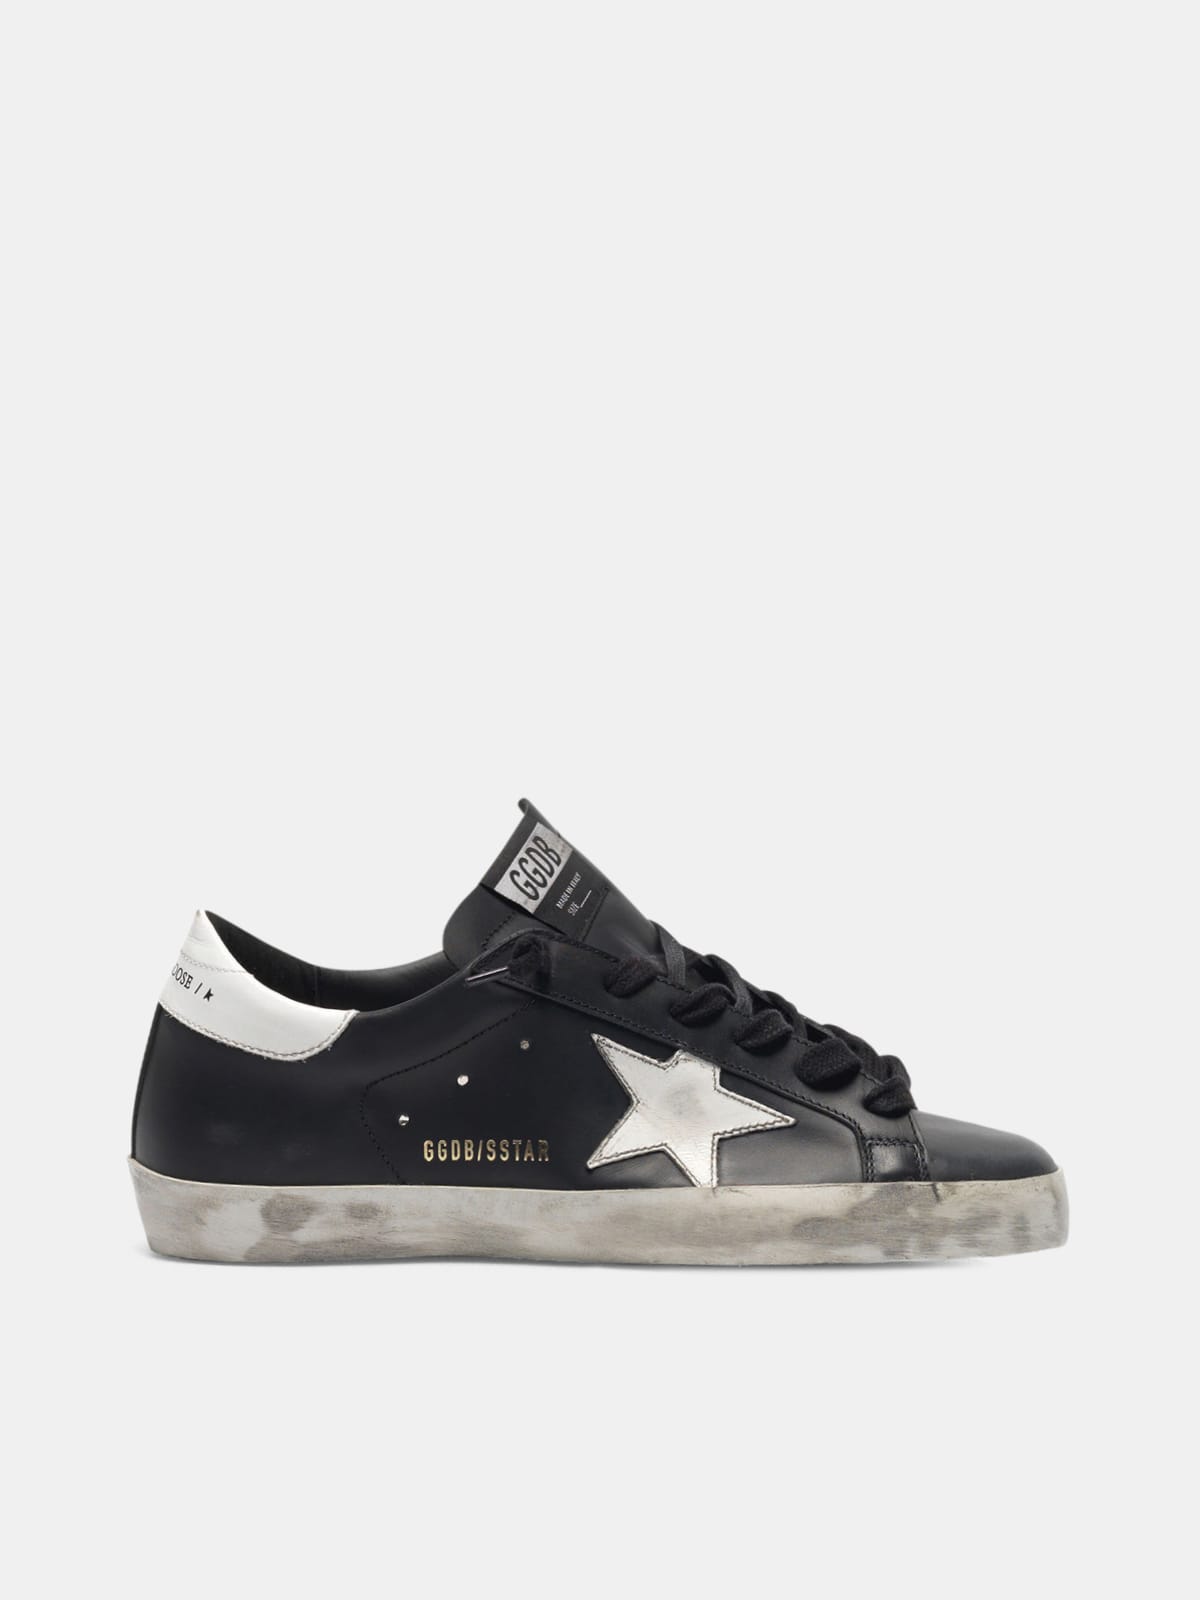 Black Super-Star sneakers leather with white Goose